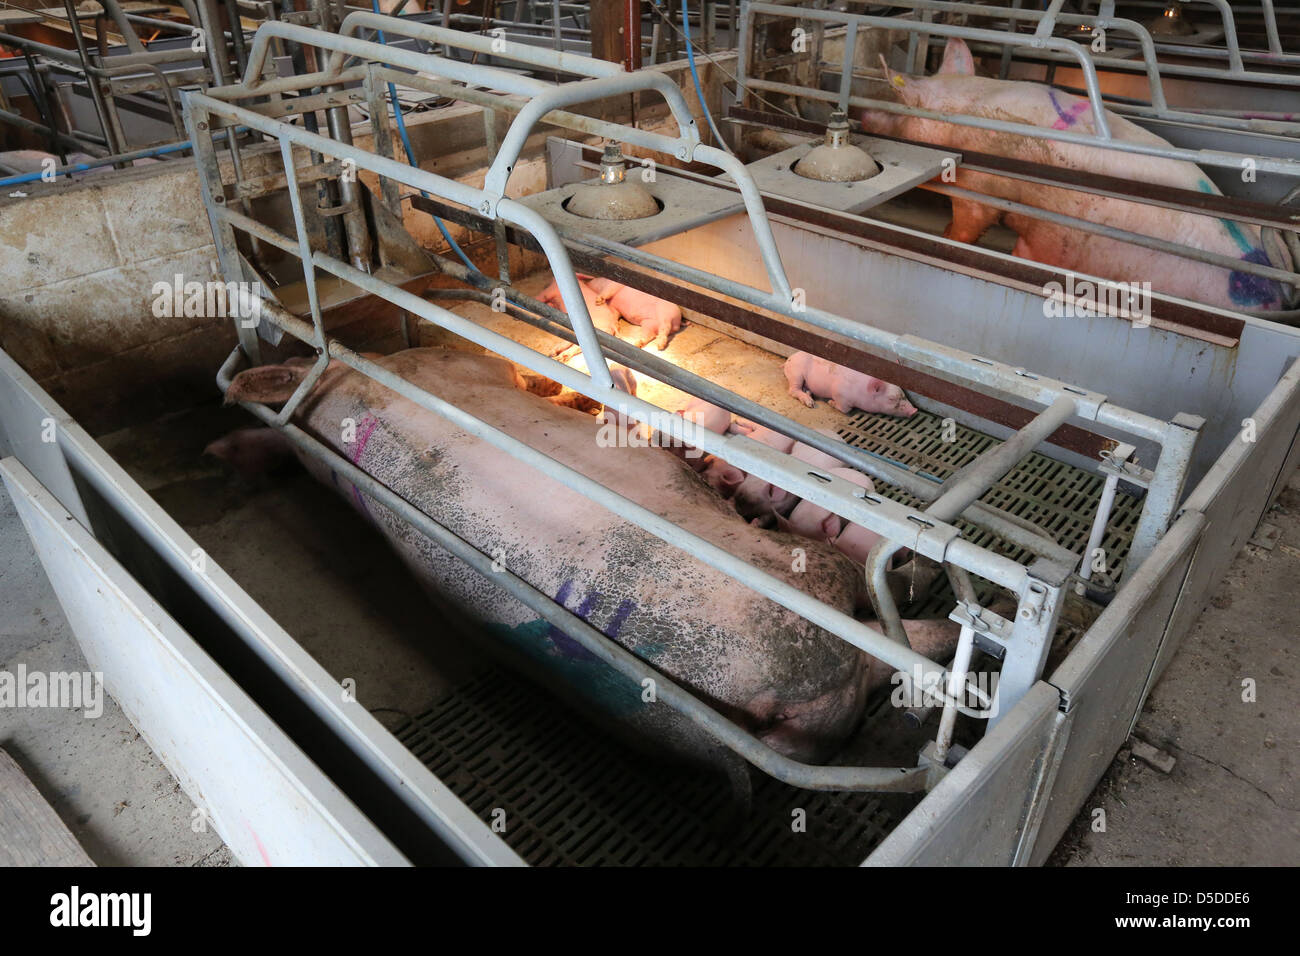 Sow in a farrowing crate Stock Photo